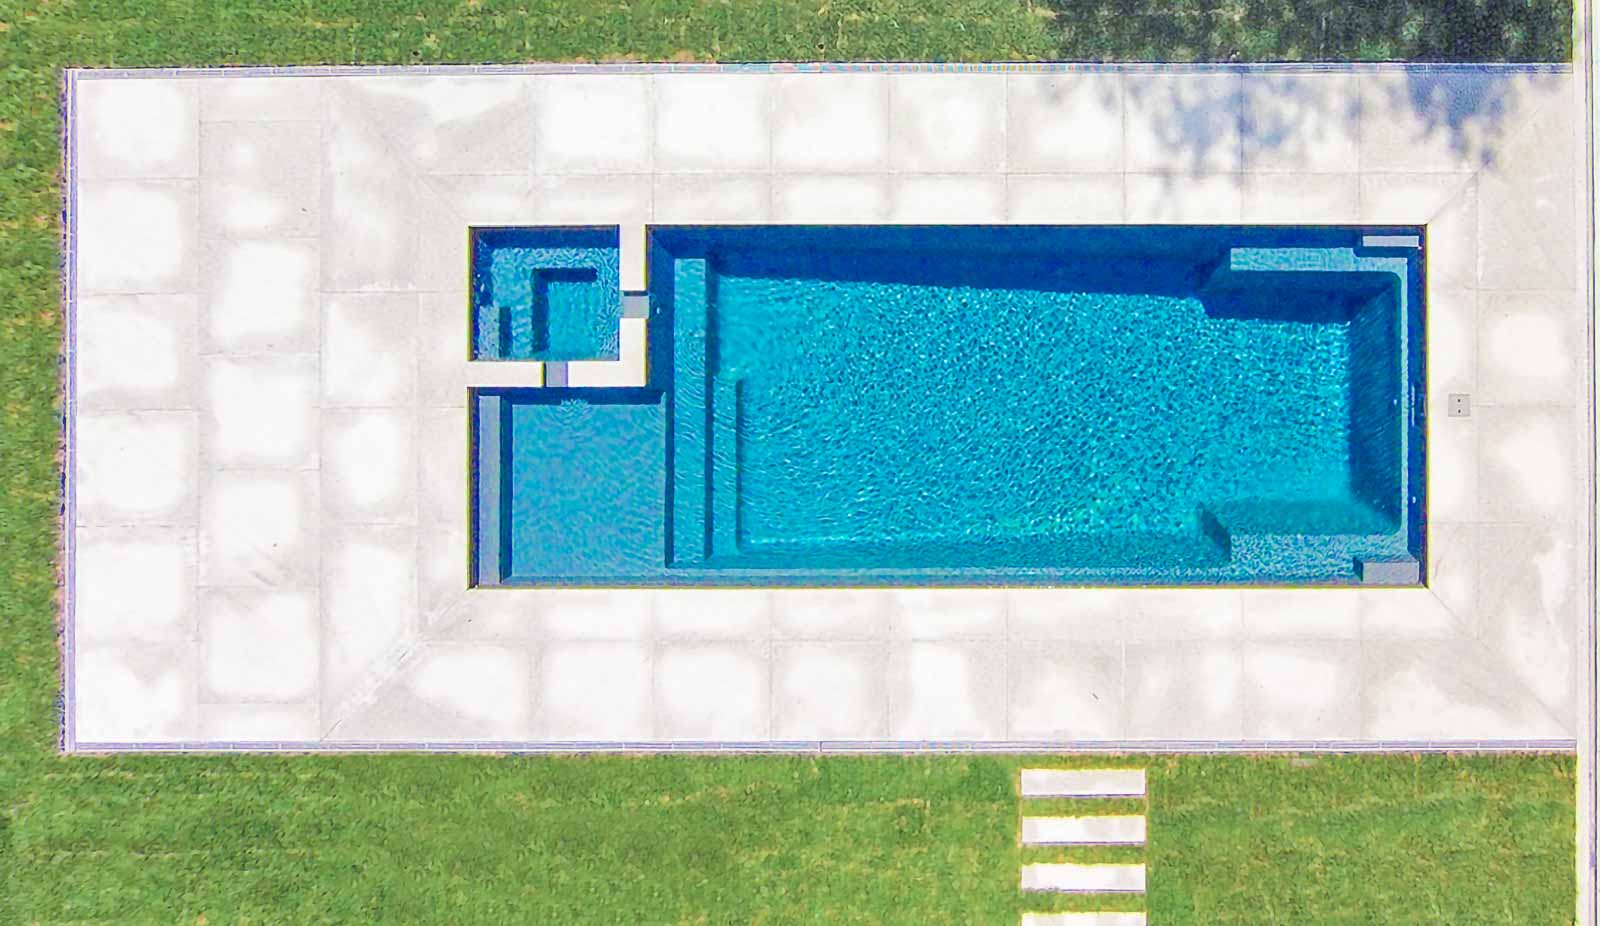 Leisure Pools Ultimate fiberglass swimming pool with built-in spa and tanning ledge